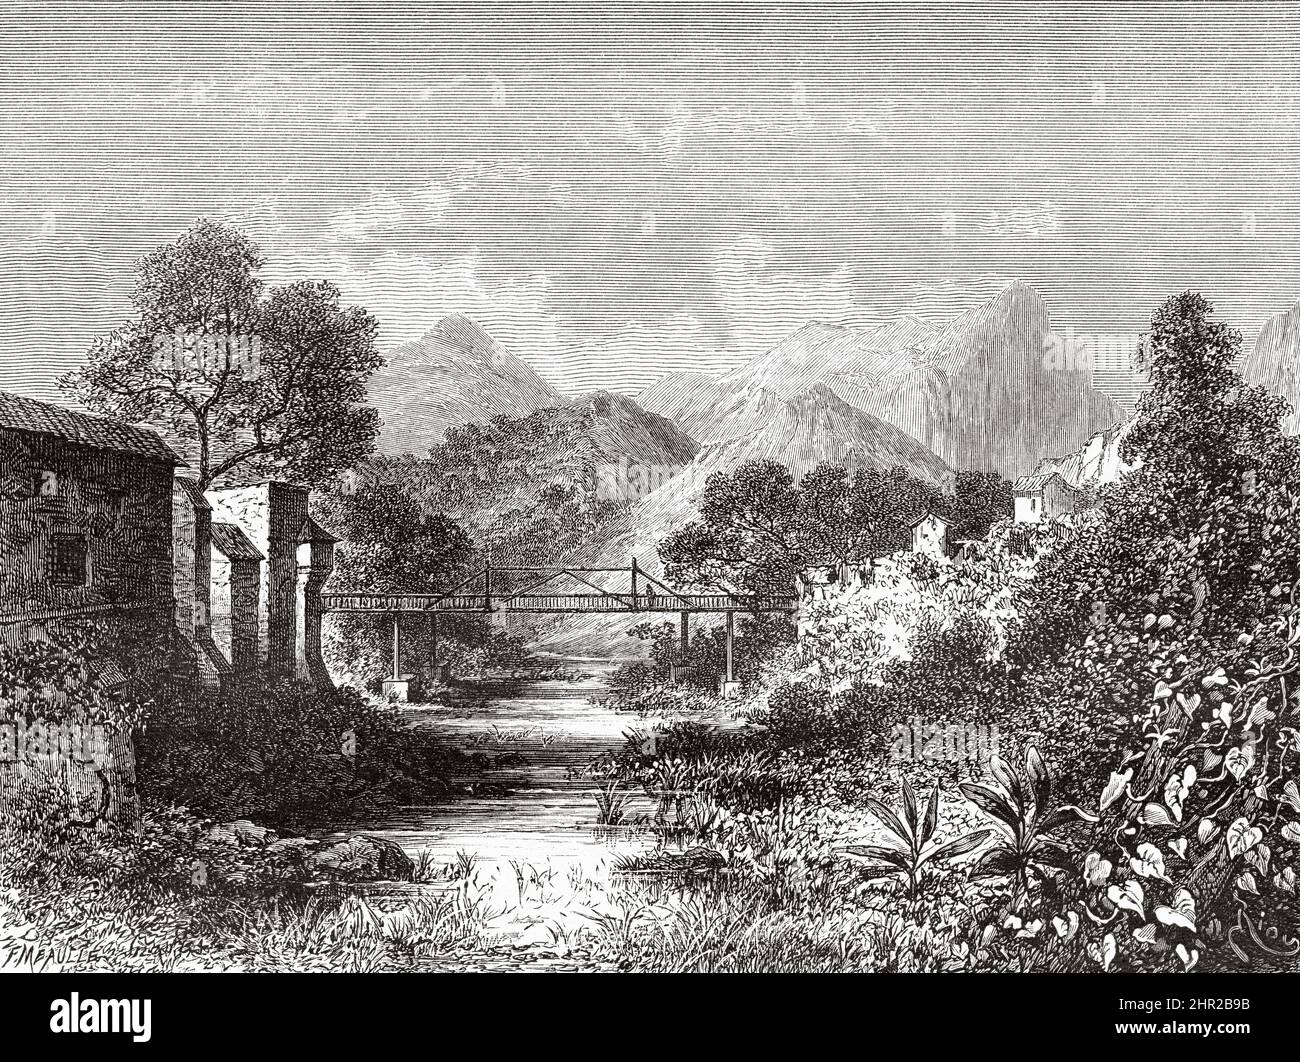 Bridge over the river Gualí in Honda, Tolima. Colombia. South America. Old 19th century engraved illustration from Journey to Colombia by Edward Francois Andre, Le Tour du Monde 1877 Stock Photo